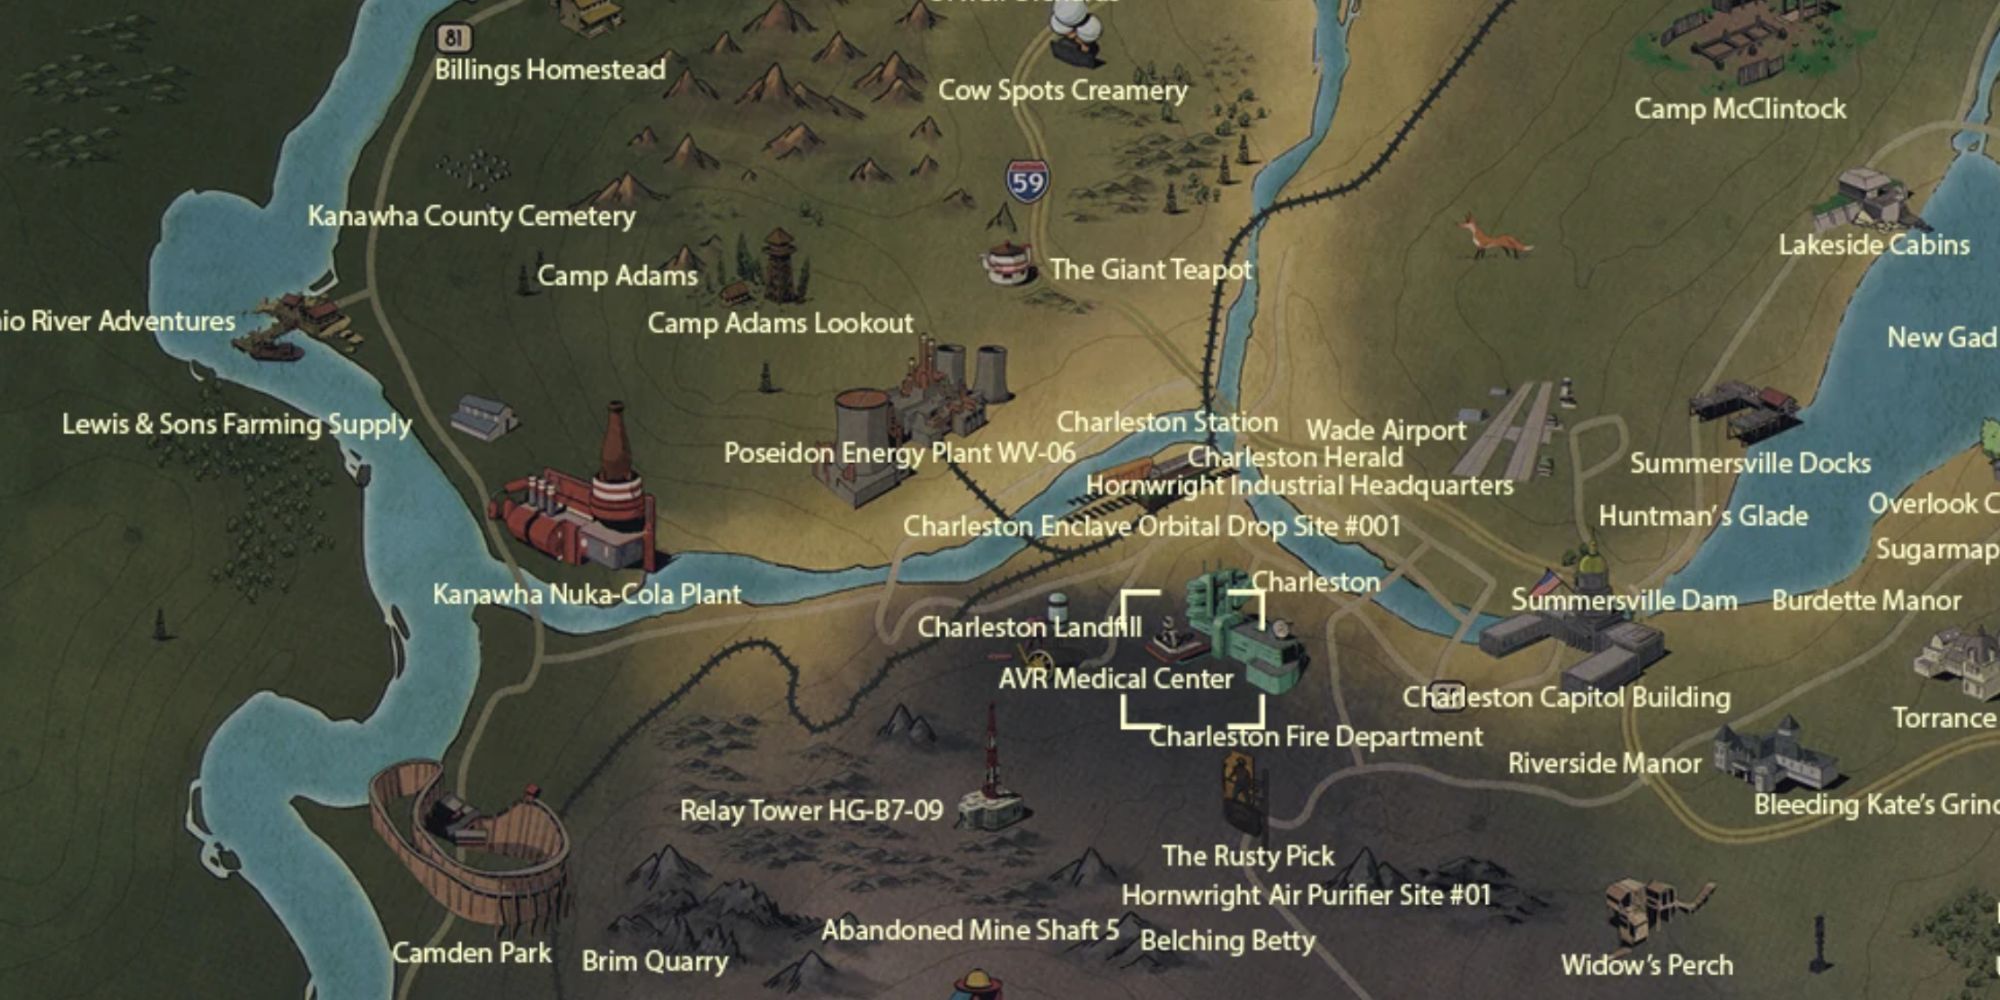 fallout_76_avr_medical_center_on_the_map